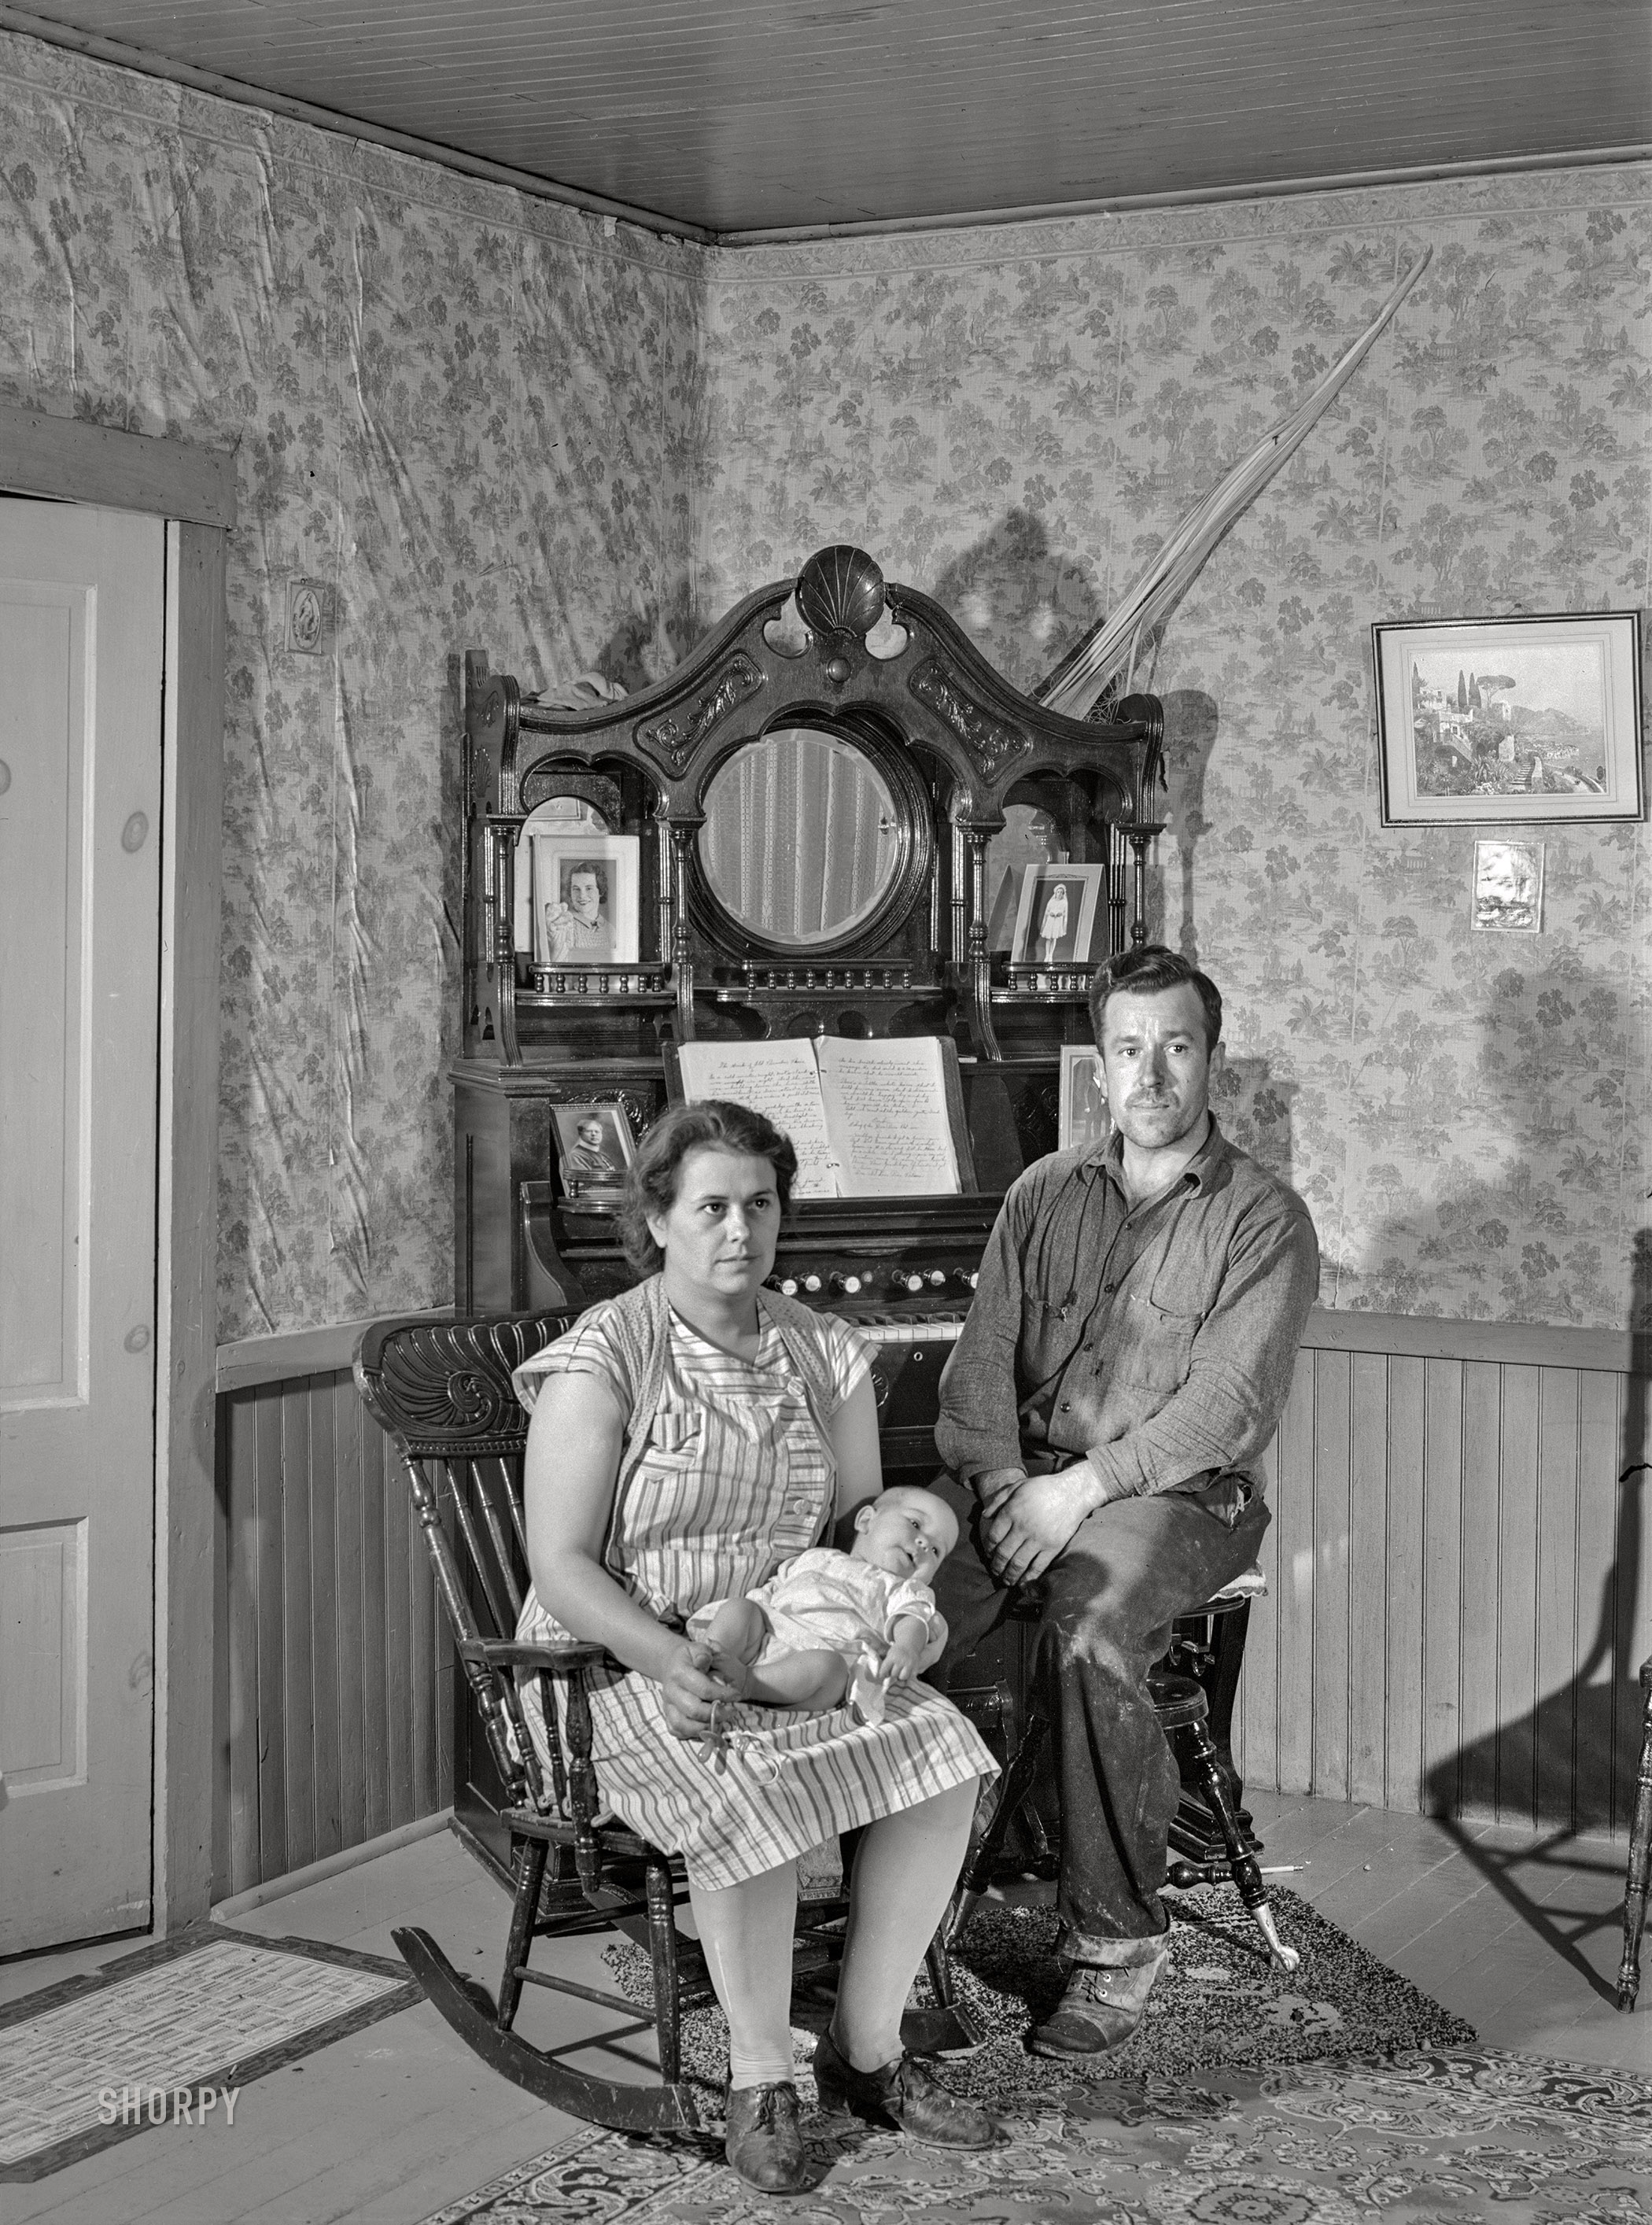 August 1940. "Family in Mauch Chunk, Pennsylvania." Medium format acetate negative by Jack Delano for the Farm Security Administration. View full size.